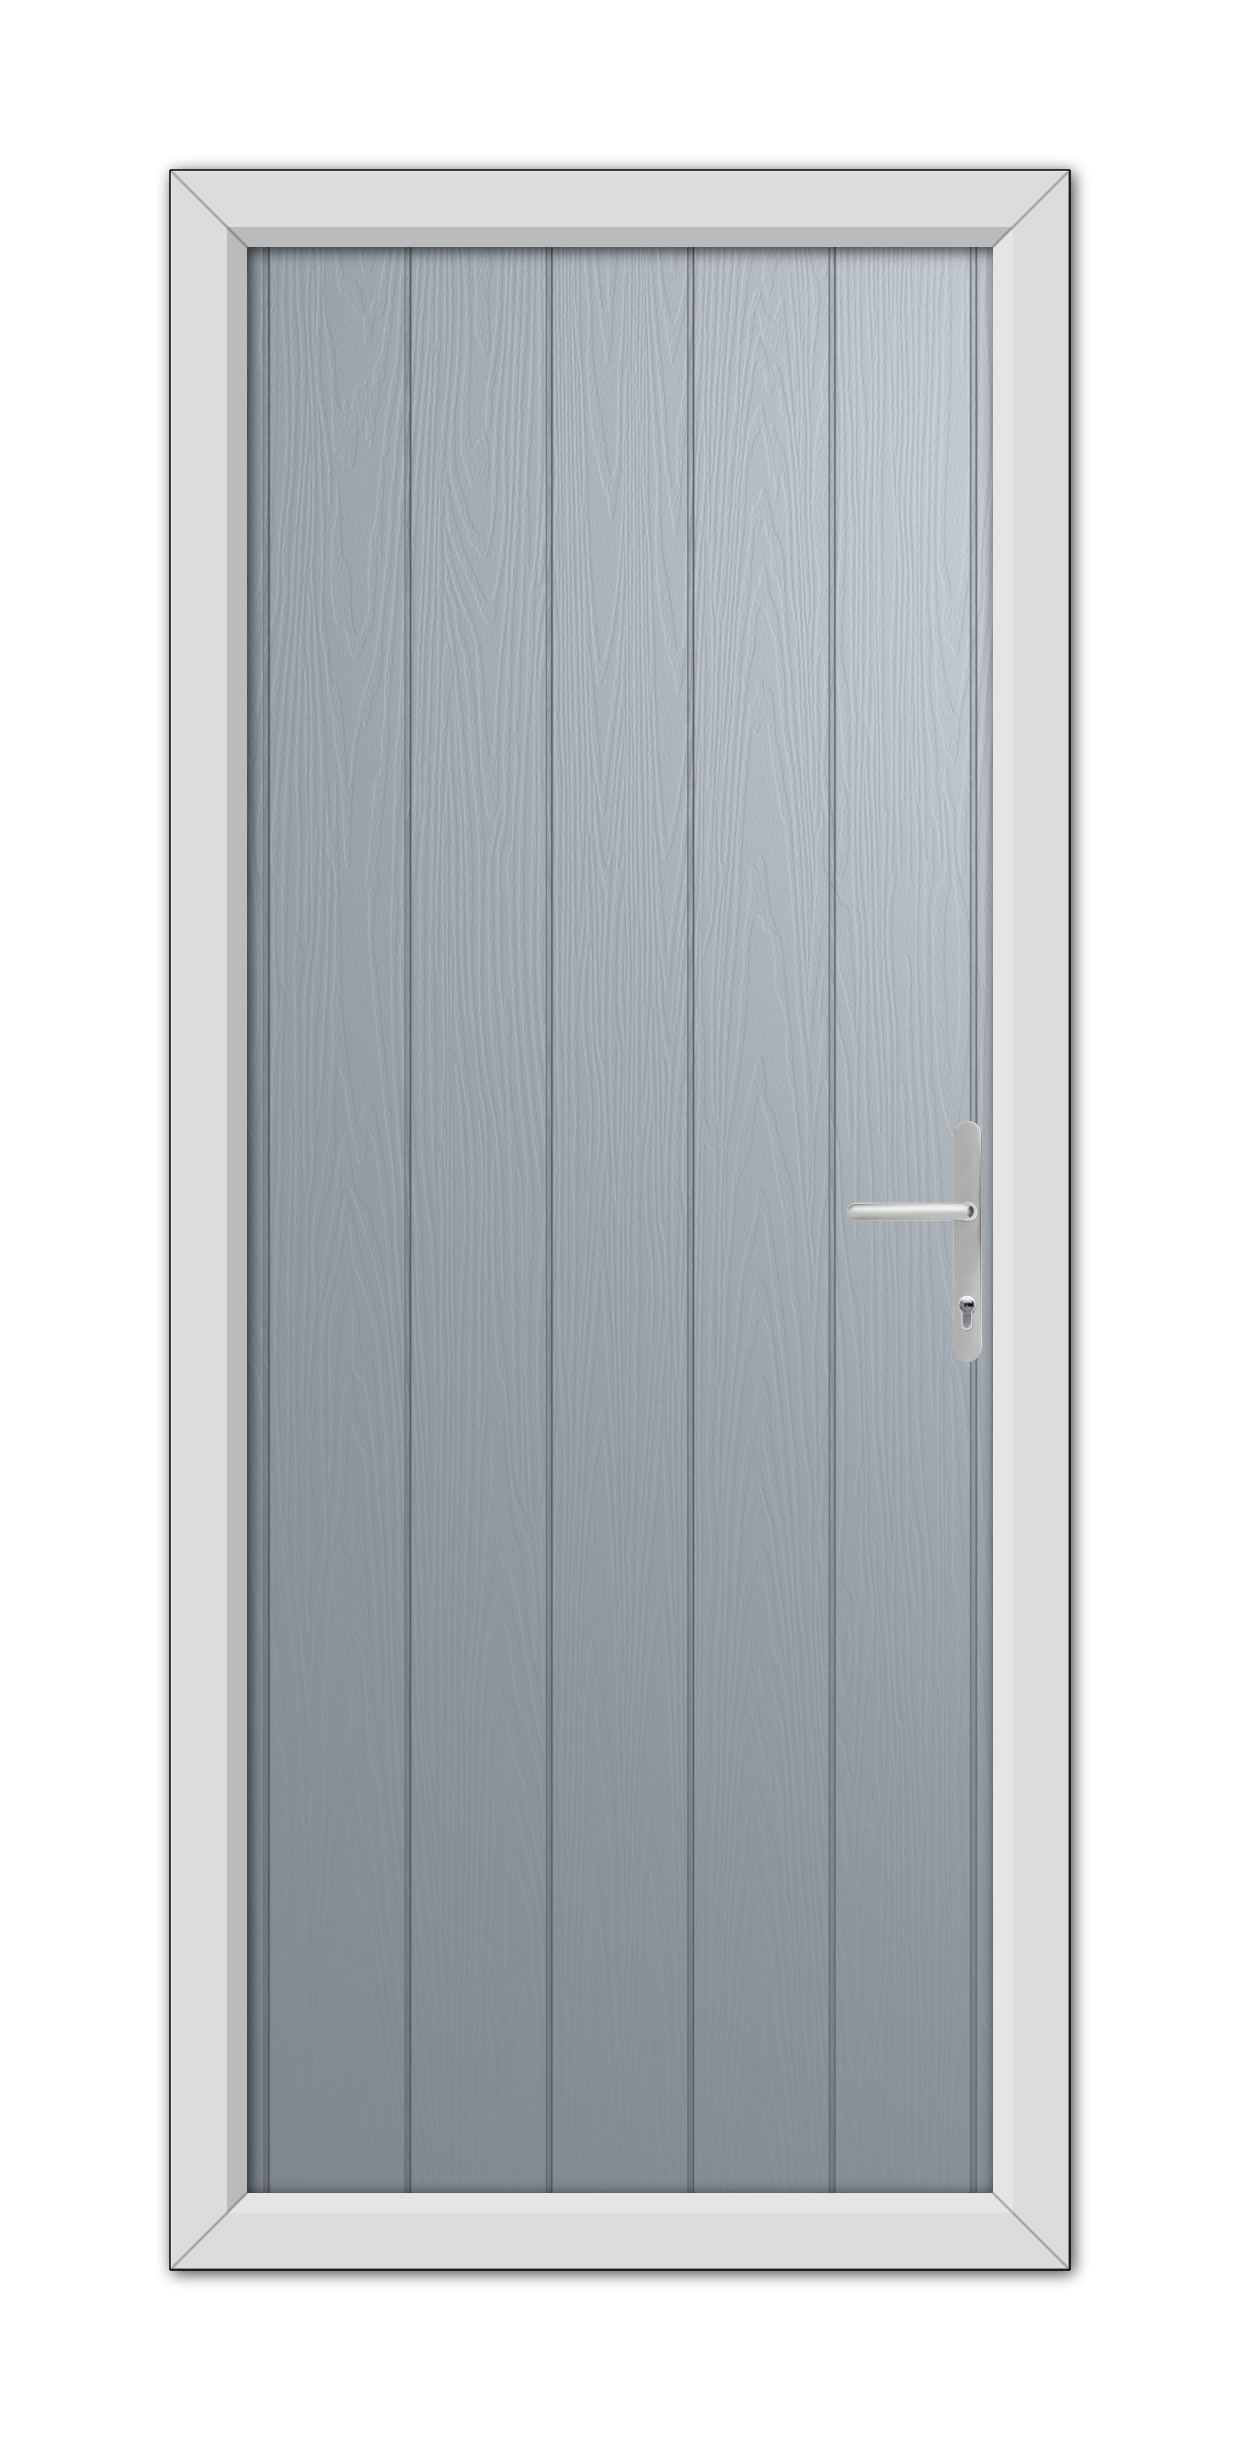 A modern French Grey Gloucester Composite Door 48mm Timber Core with a metal handle, set within a simple white frame, isolated on a white background.